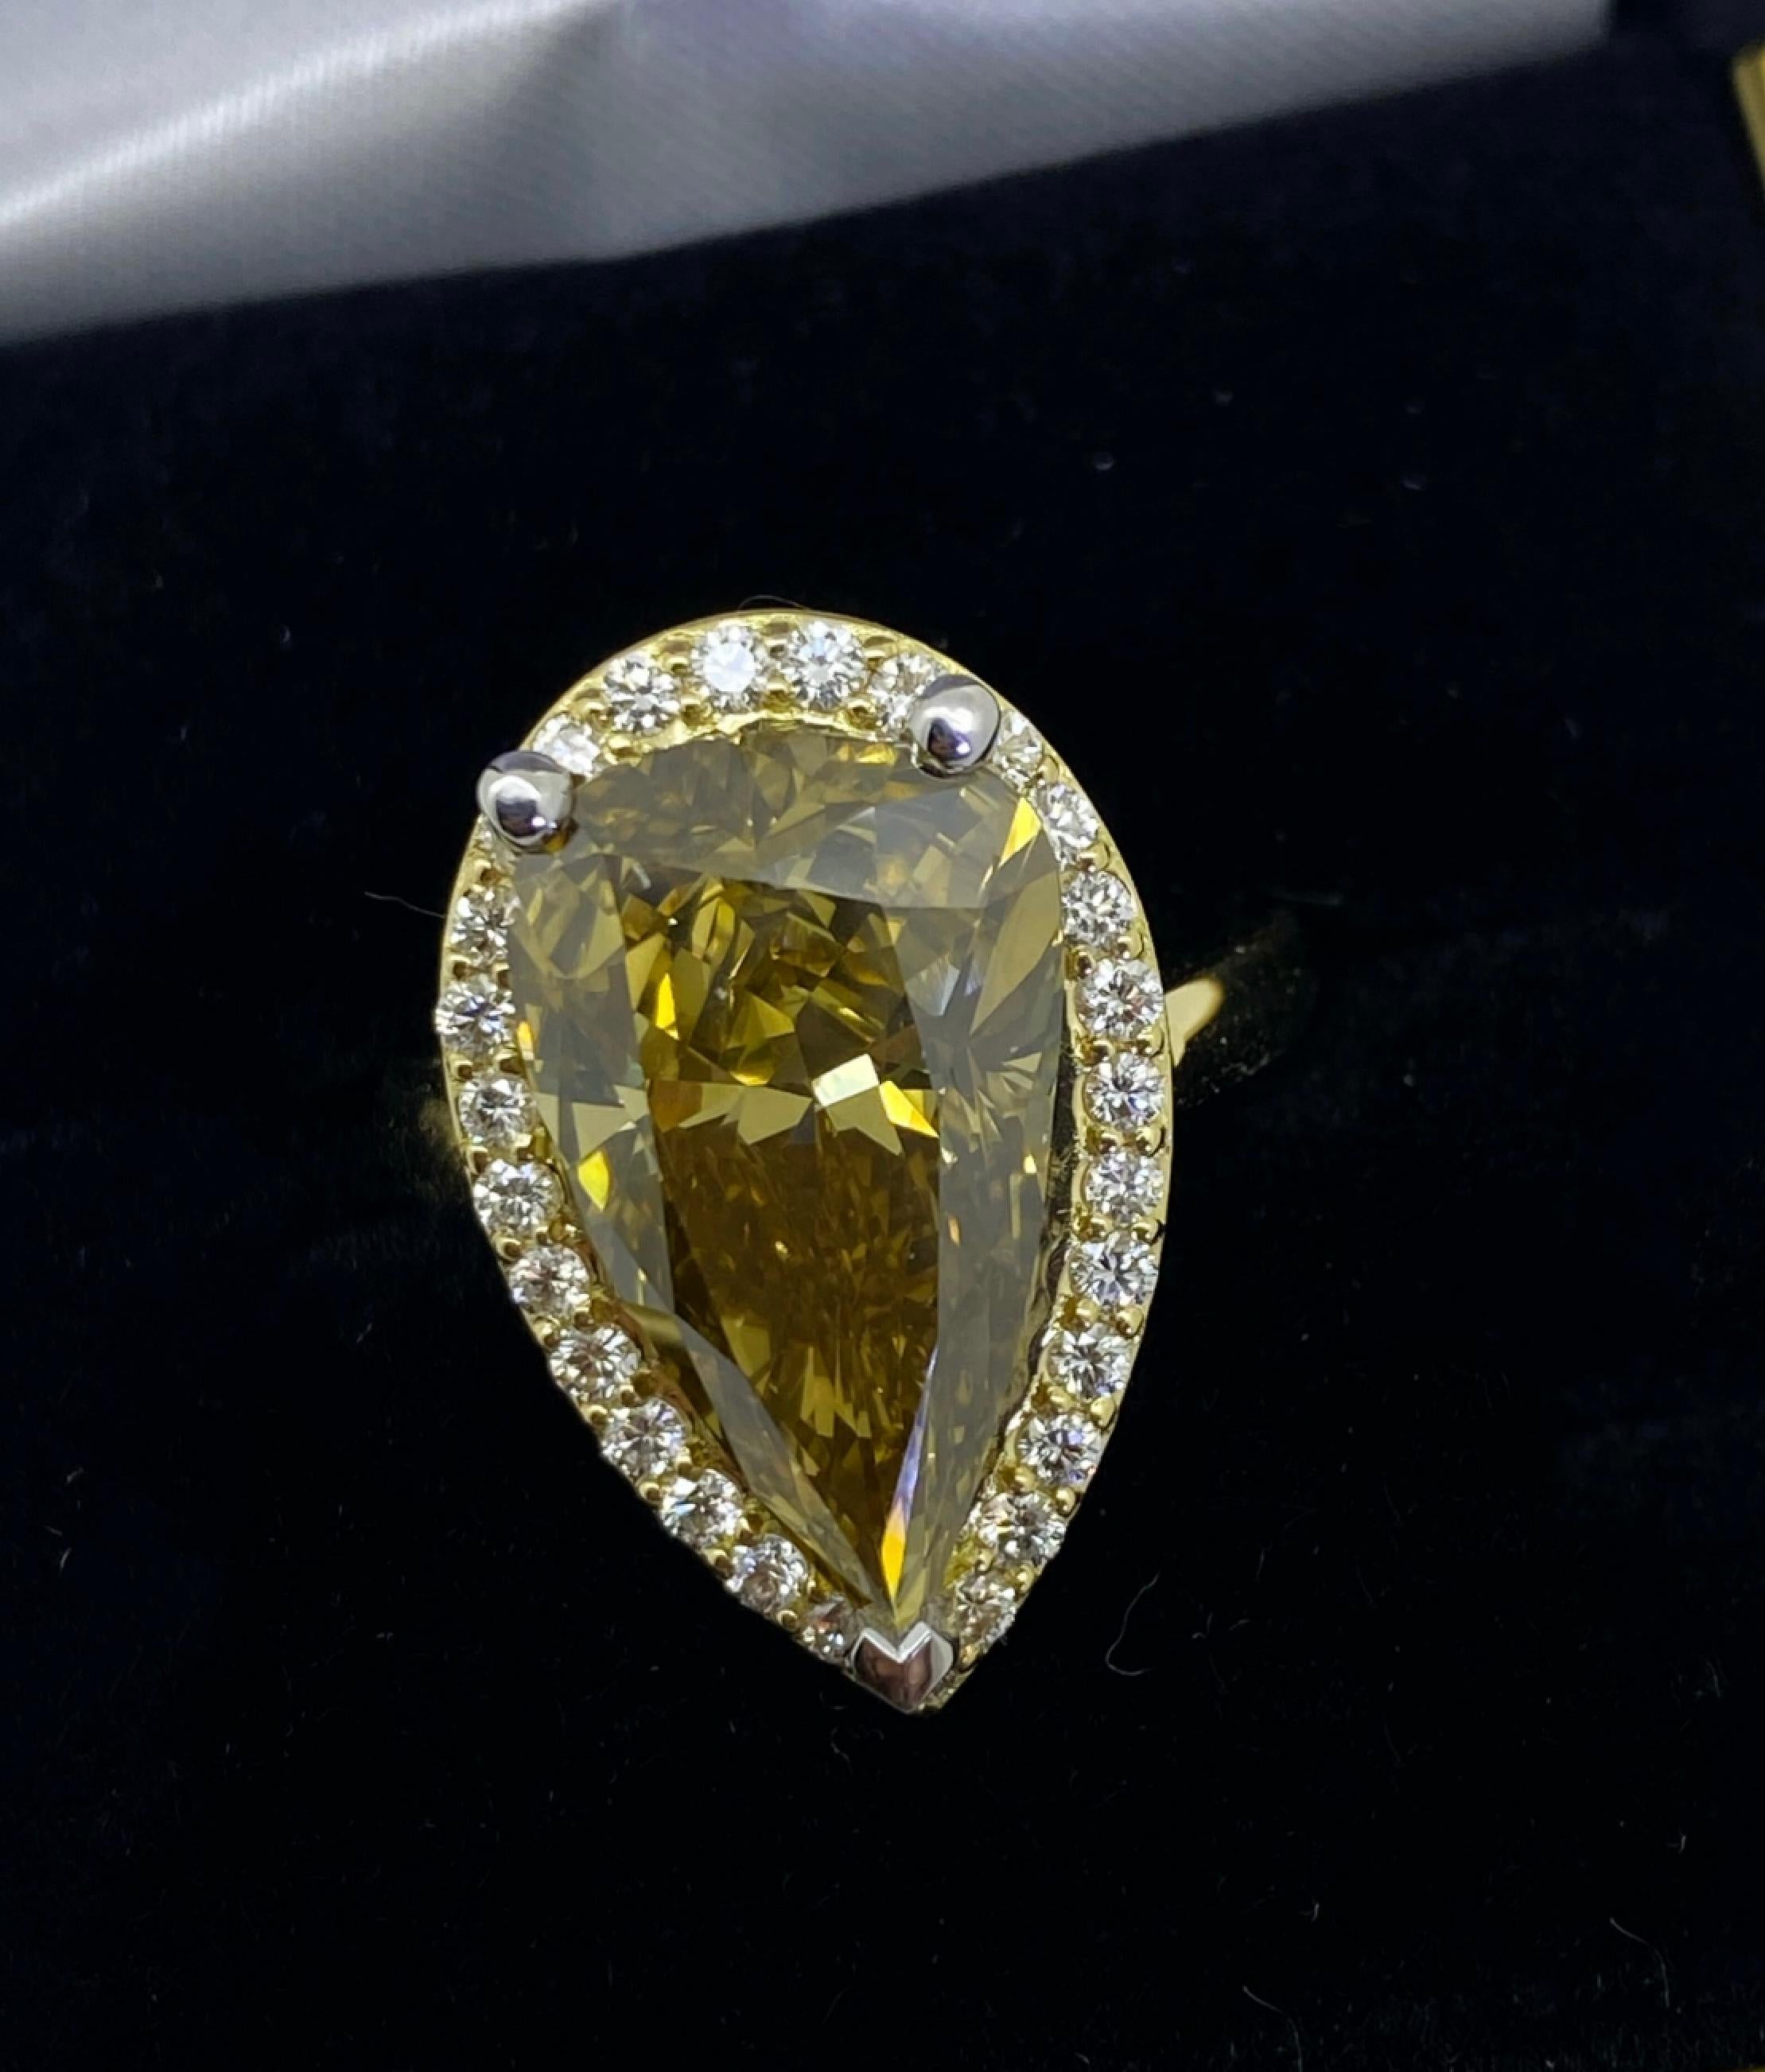 6.36ct Fancy Brownish Yellow Natural Pear Cut Diamond Ring in 18K Yellow Gold For Sale 4